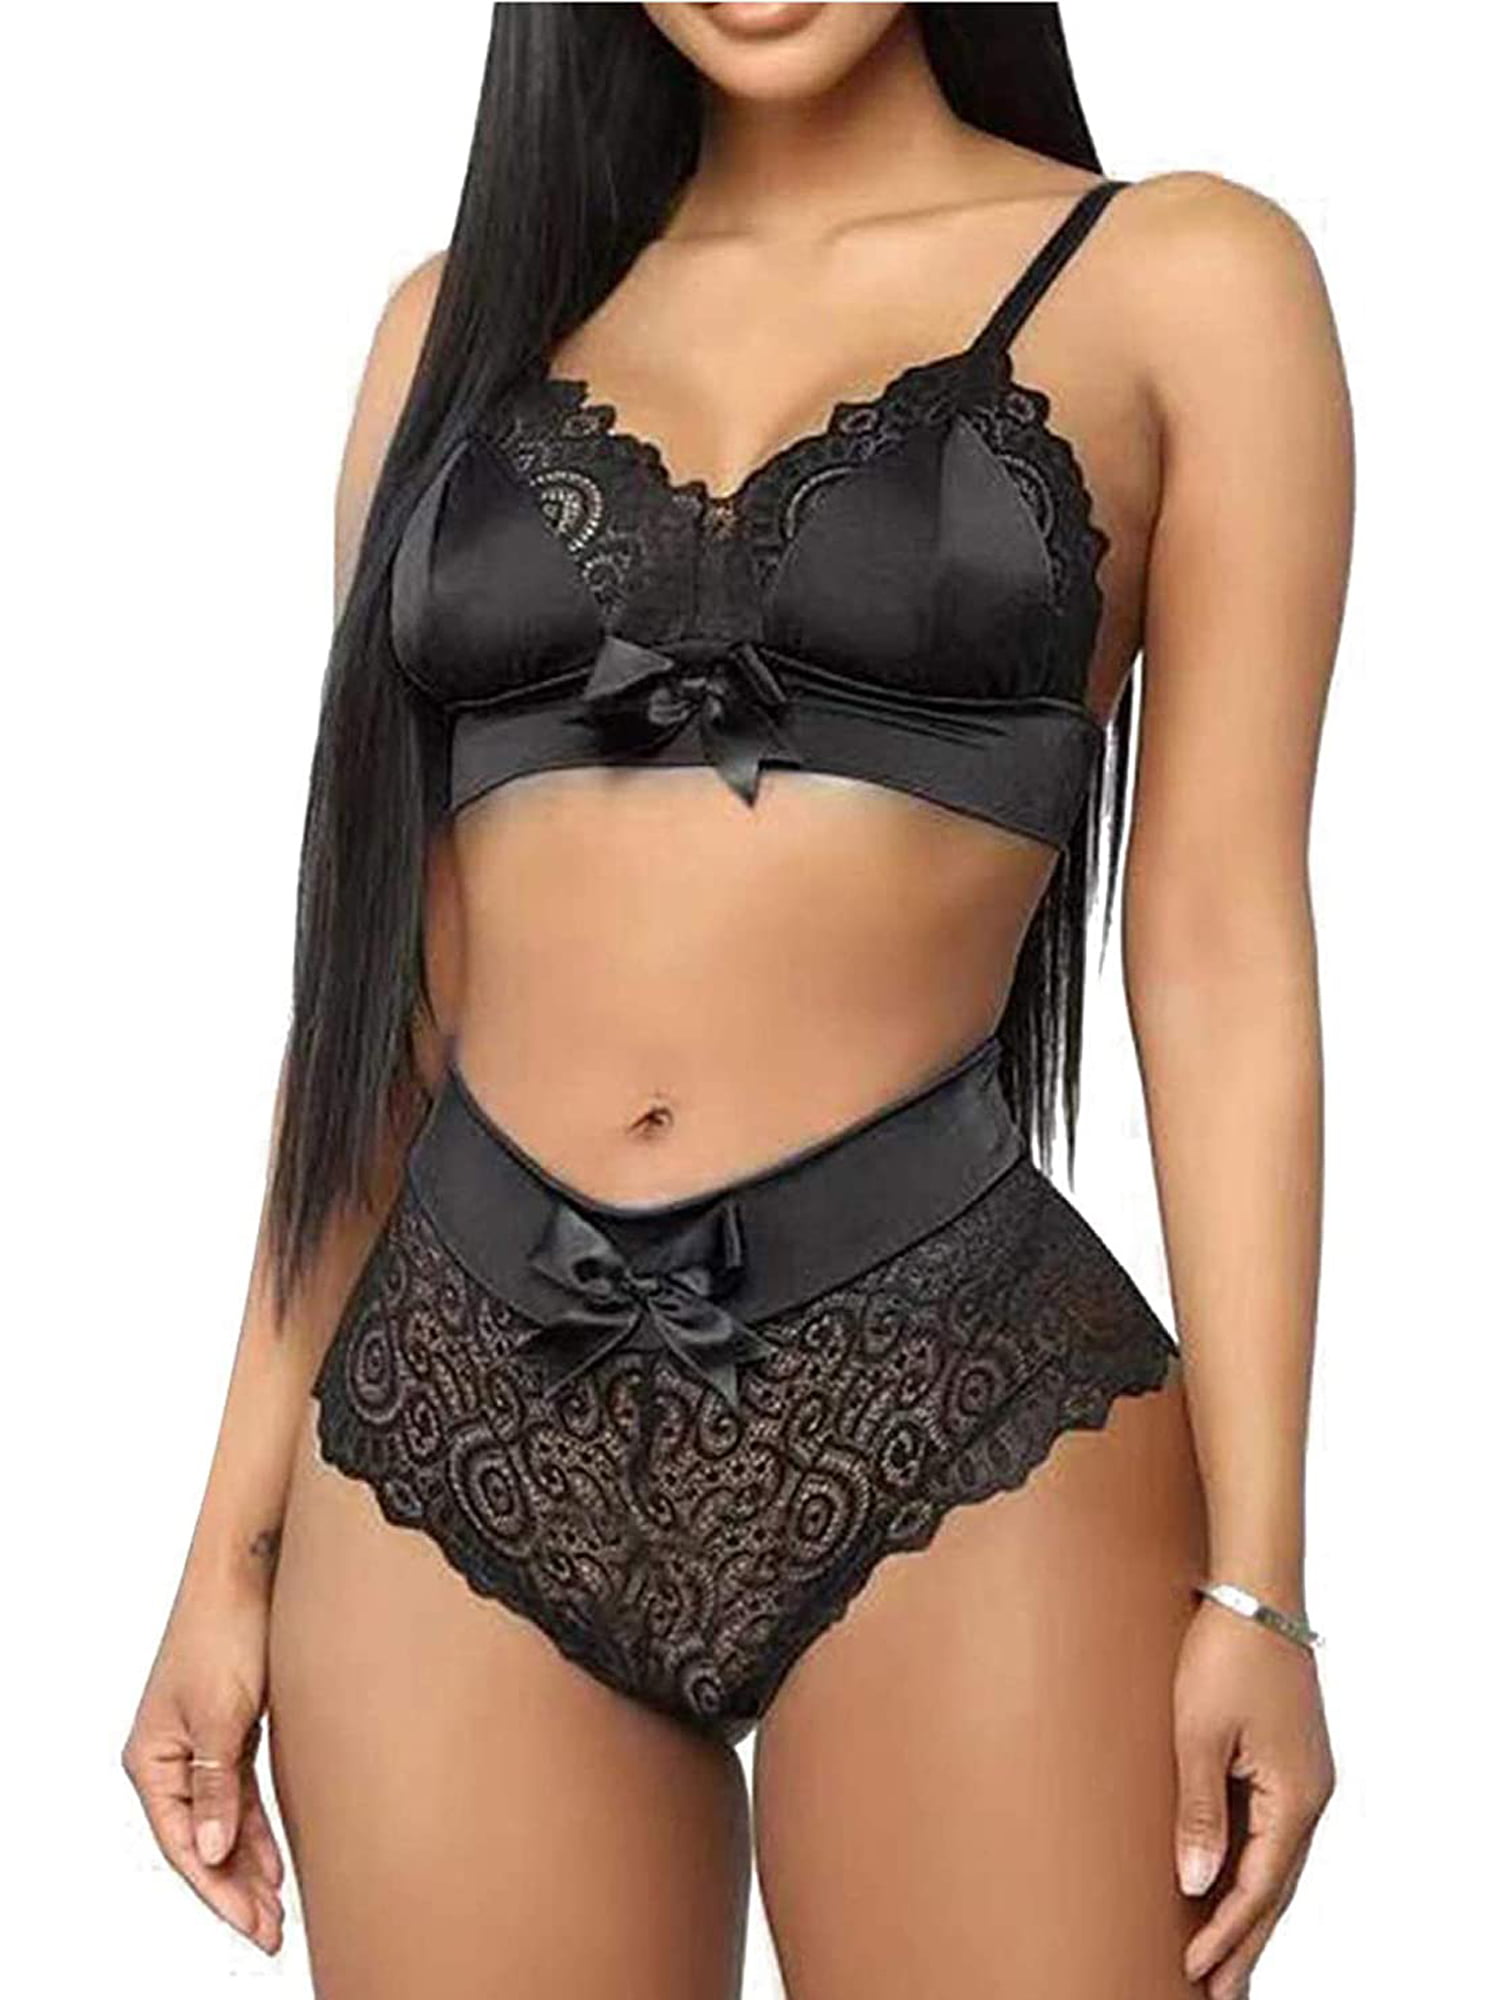 ETAOLINE Women's Sexy Floral Lace Sheer See Through Underwear Bra Panty  Set,Black,Small at  Women's Clothing store